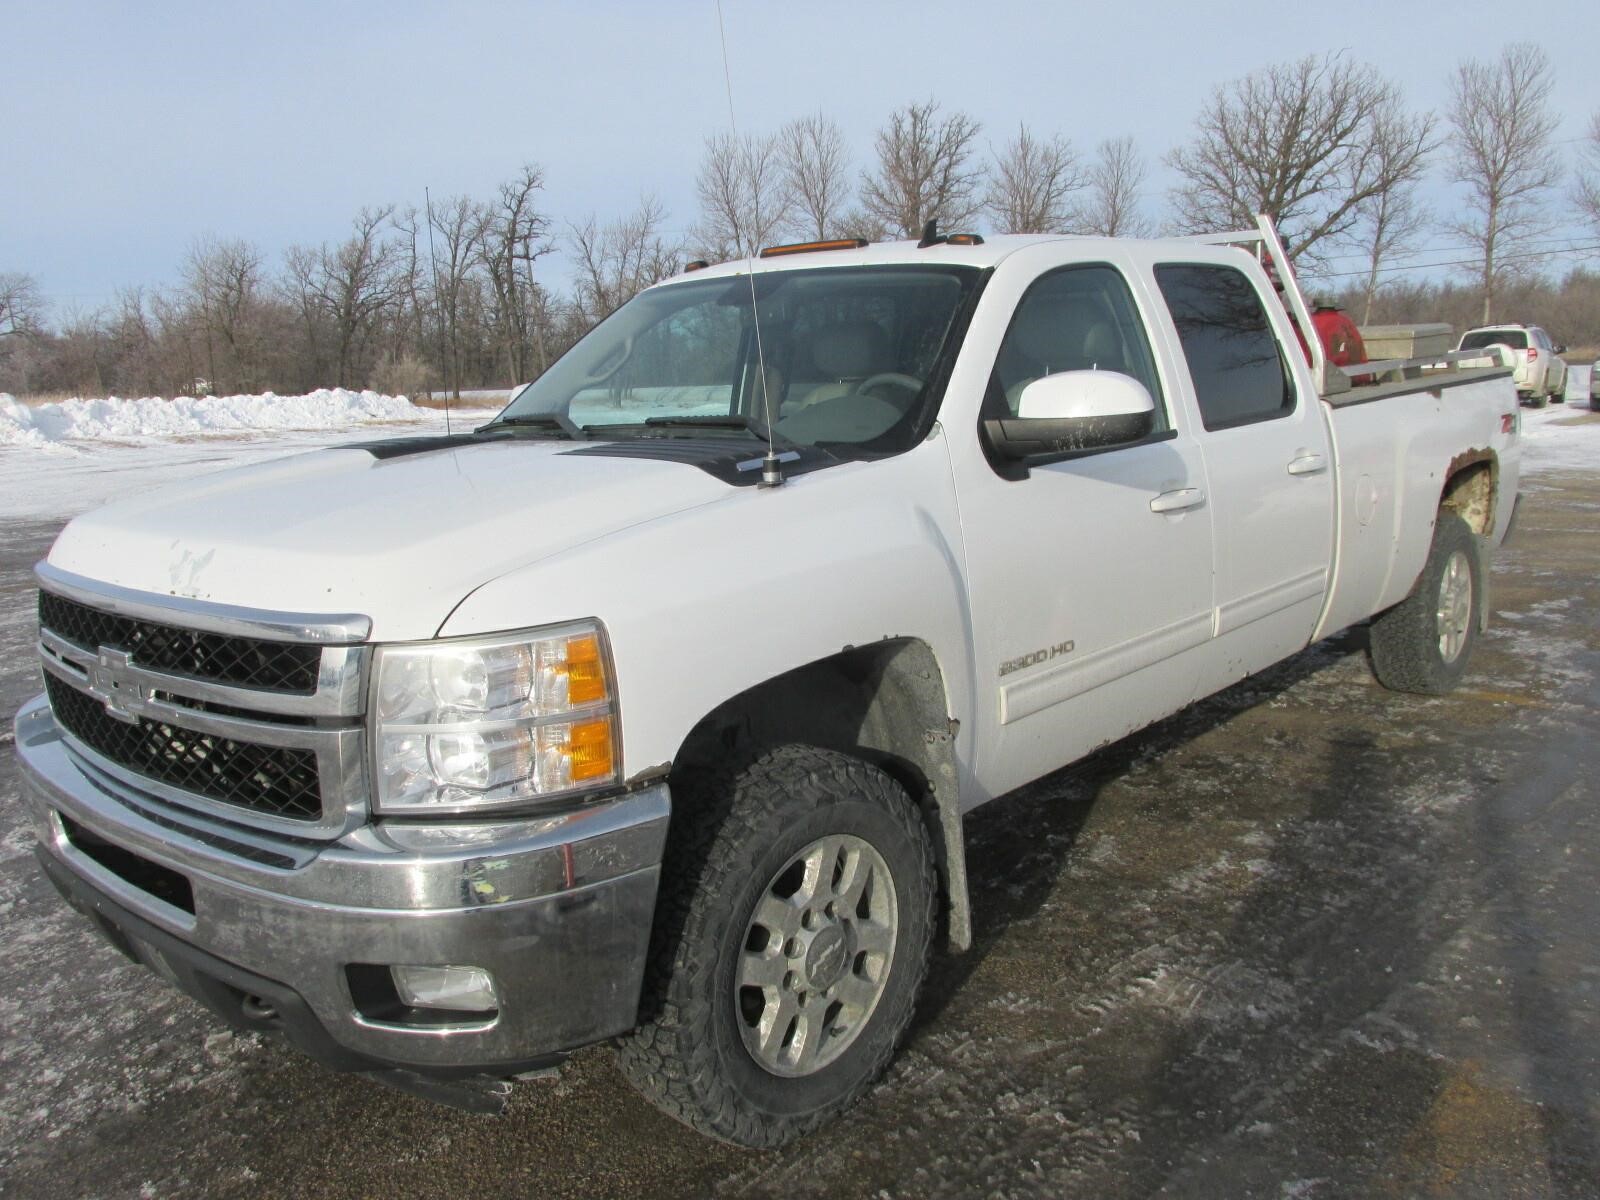 Online Auto Auction January 25 2021 Featuring MTS/Bell Can.